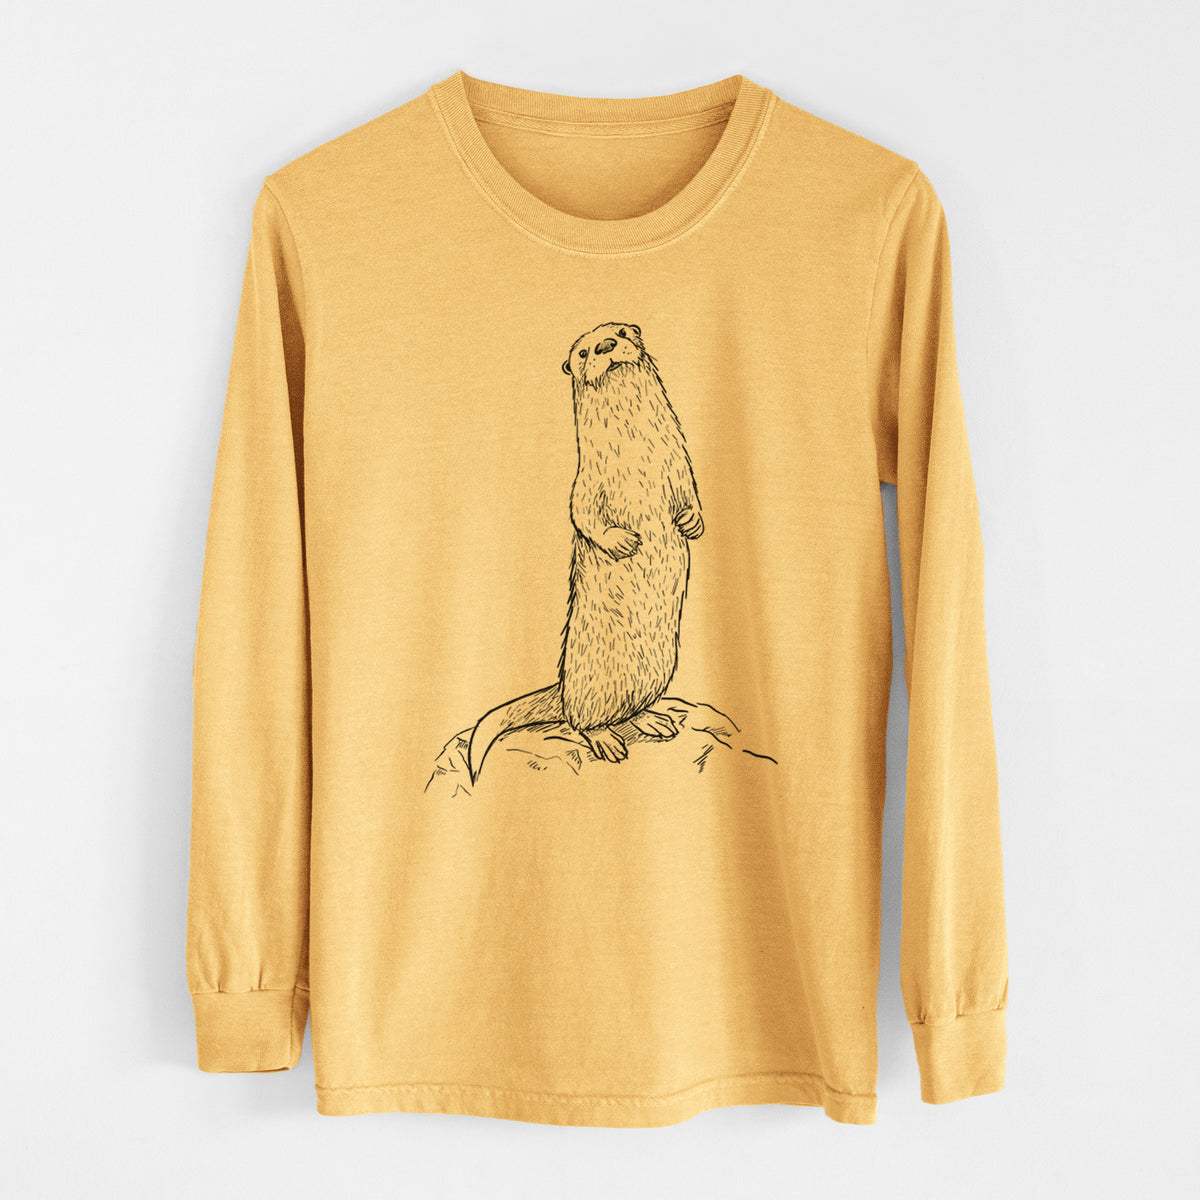 North American River Otter - Lontra canadensis - Heavyweight 100% Cotton Long Sleeve